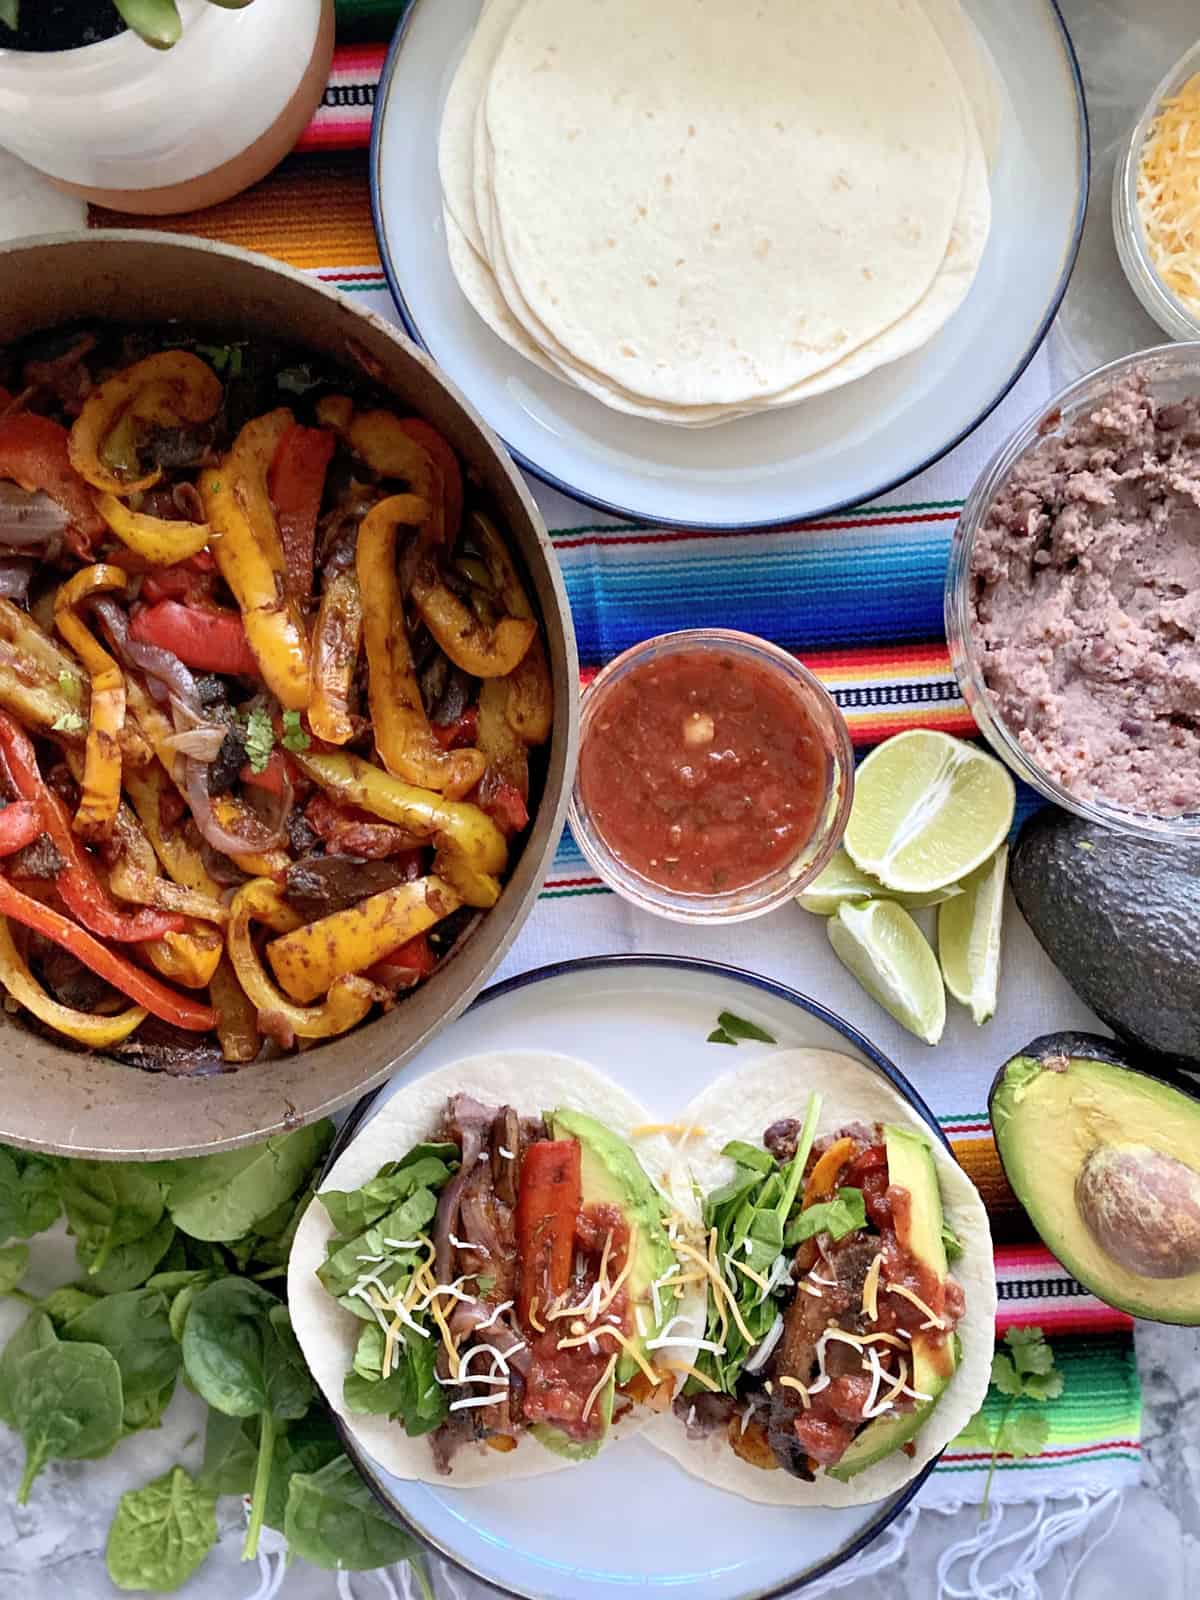 Top view of fajita peppers in a skillet, fajitas on a plate, and tortillas on the side.